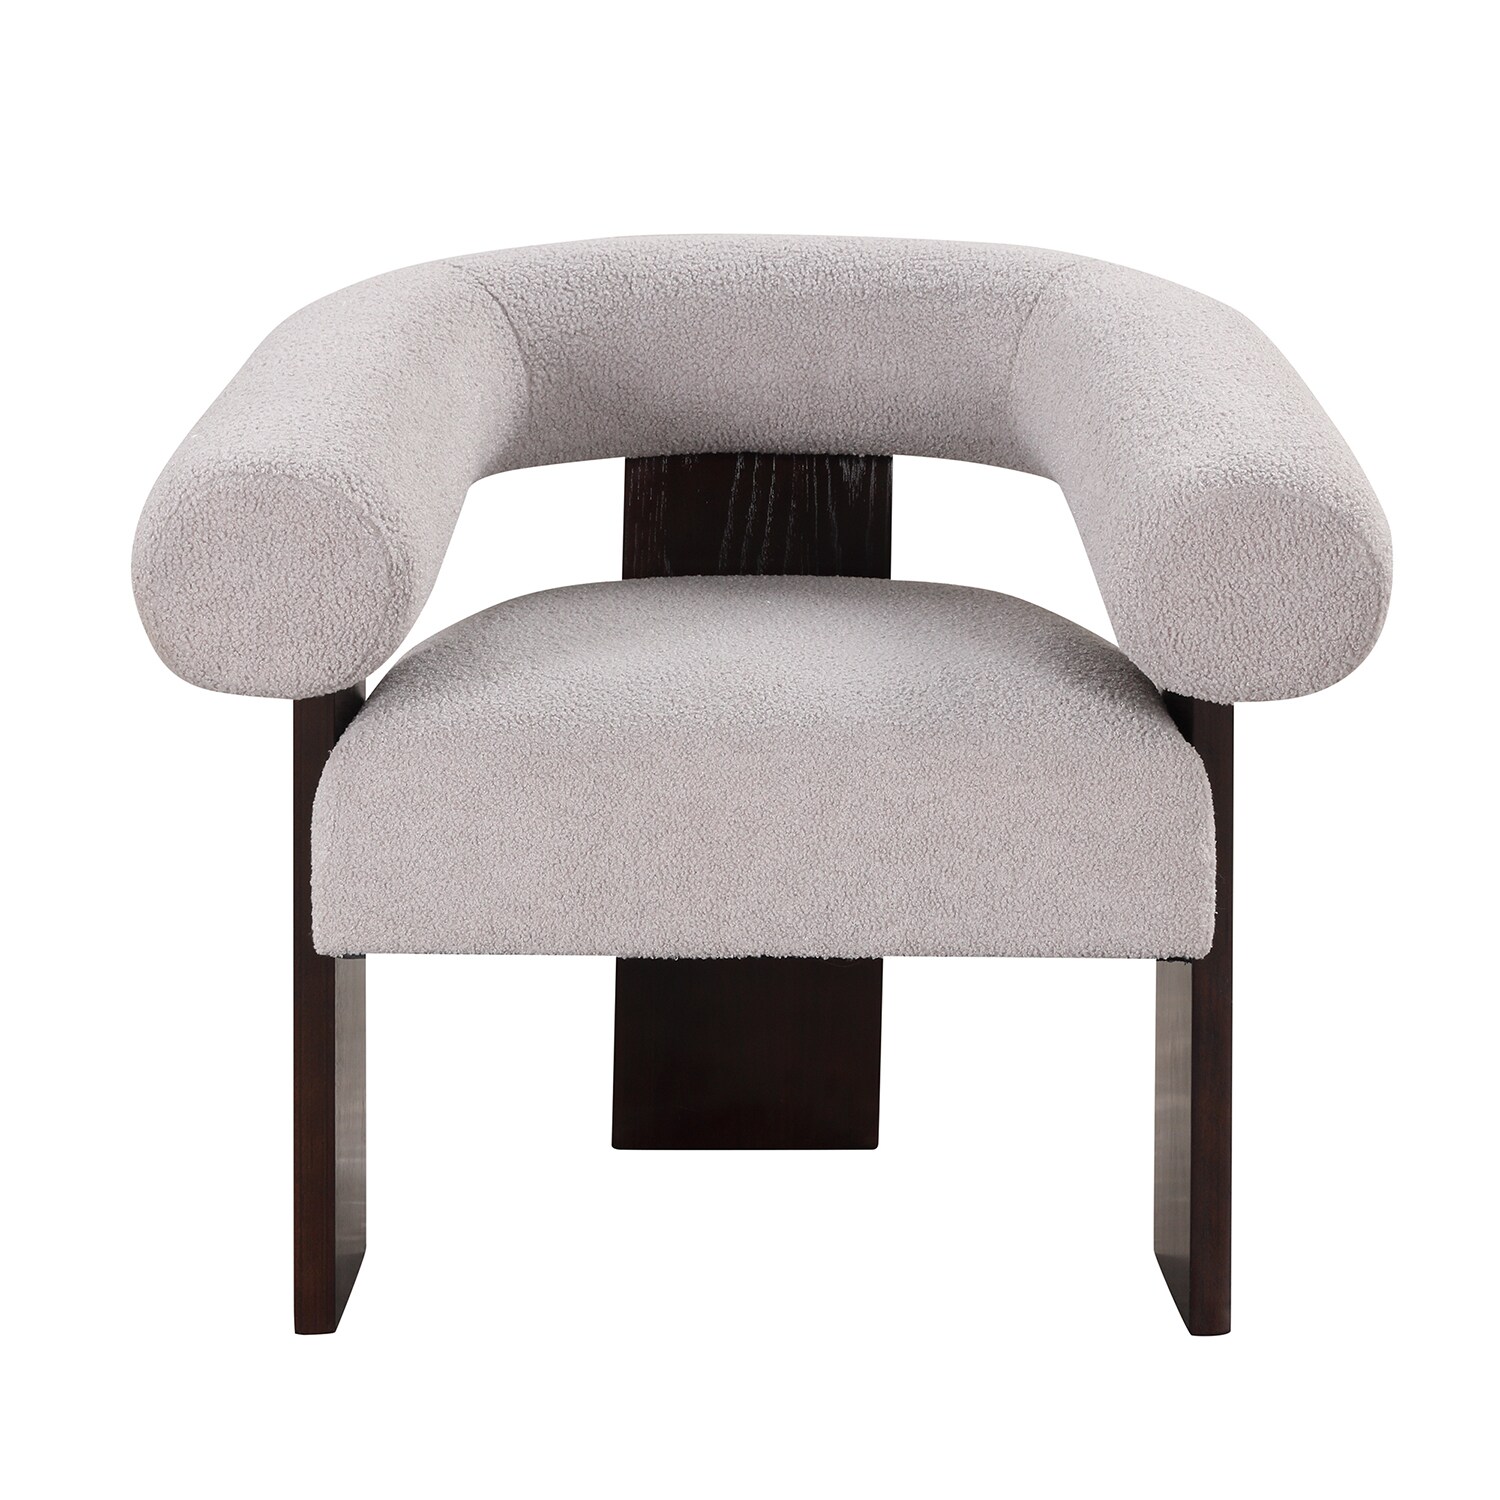 Empierre Tufted Light Beige Fabric Chair and Ottoman  Chair and ottoman,  Chair and ottoman set, Chair fabric